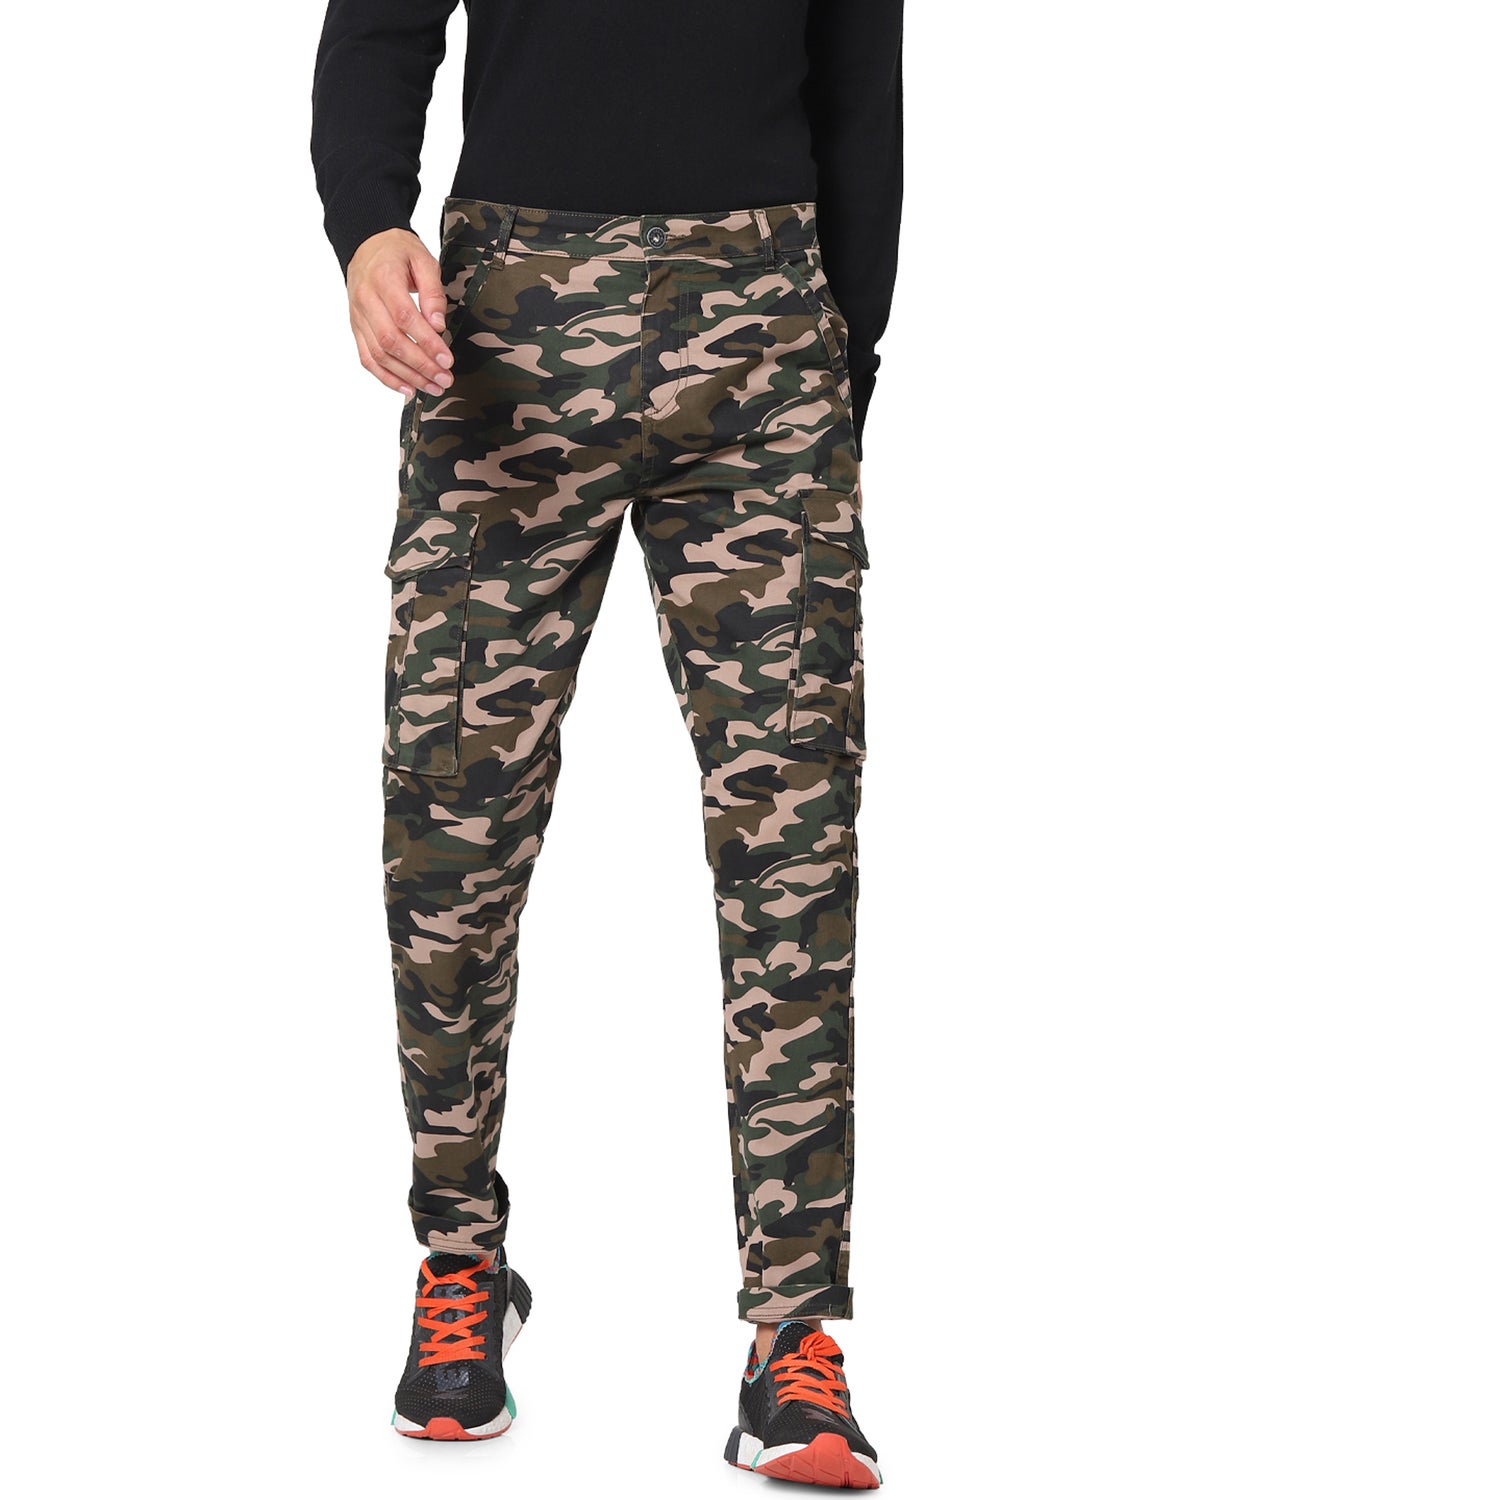 Green Printed Slim Fit Cargos Trousers (TOCARGO)